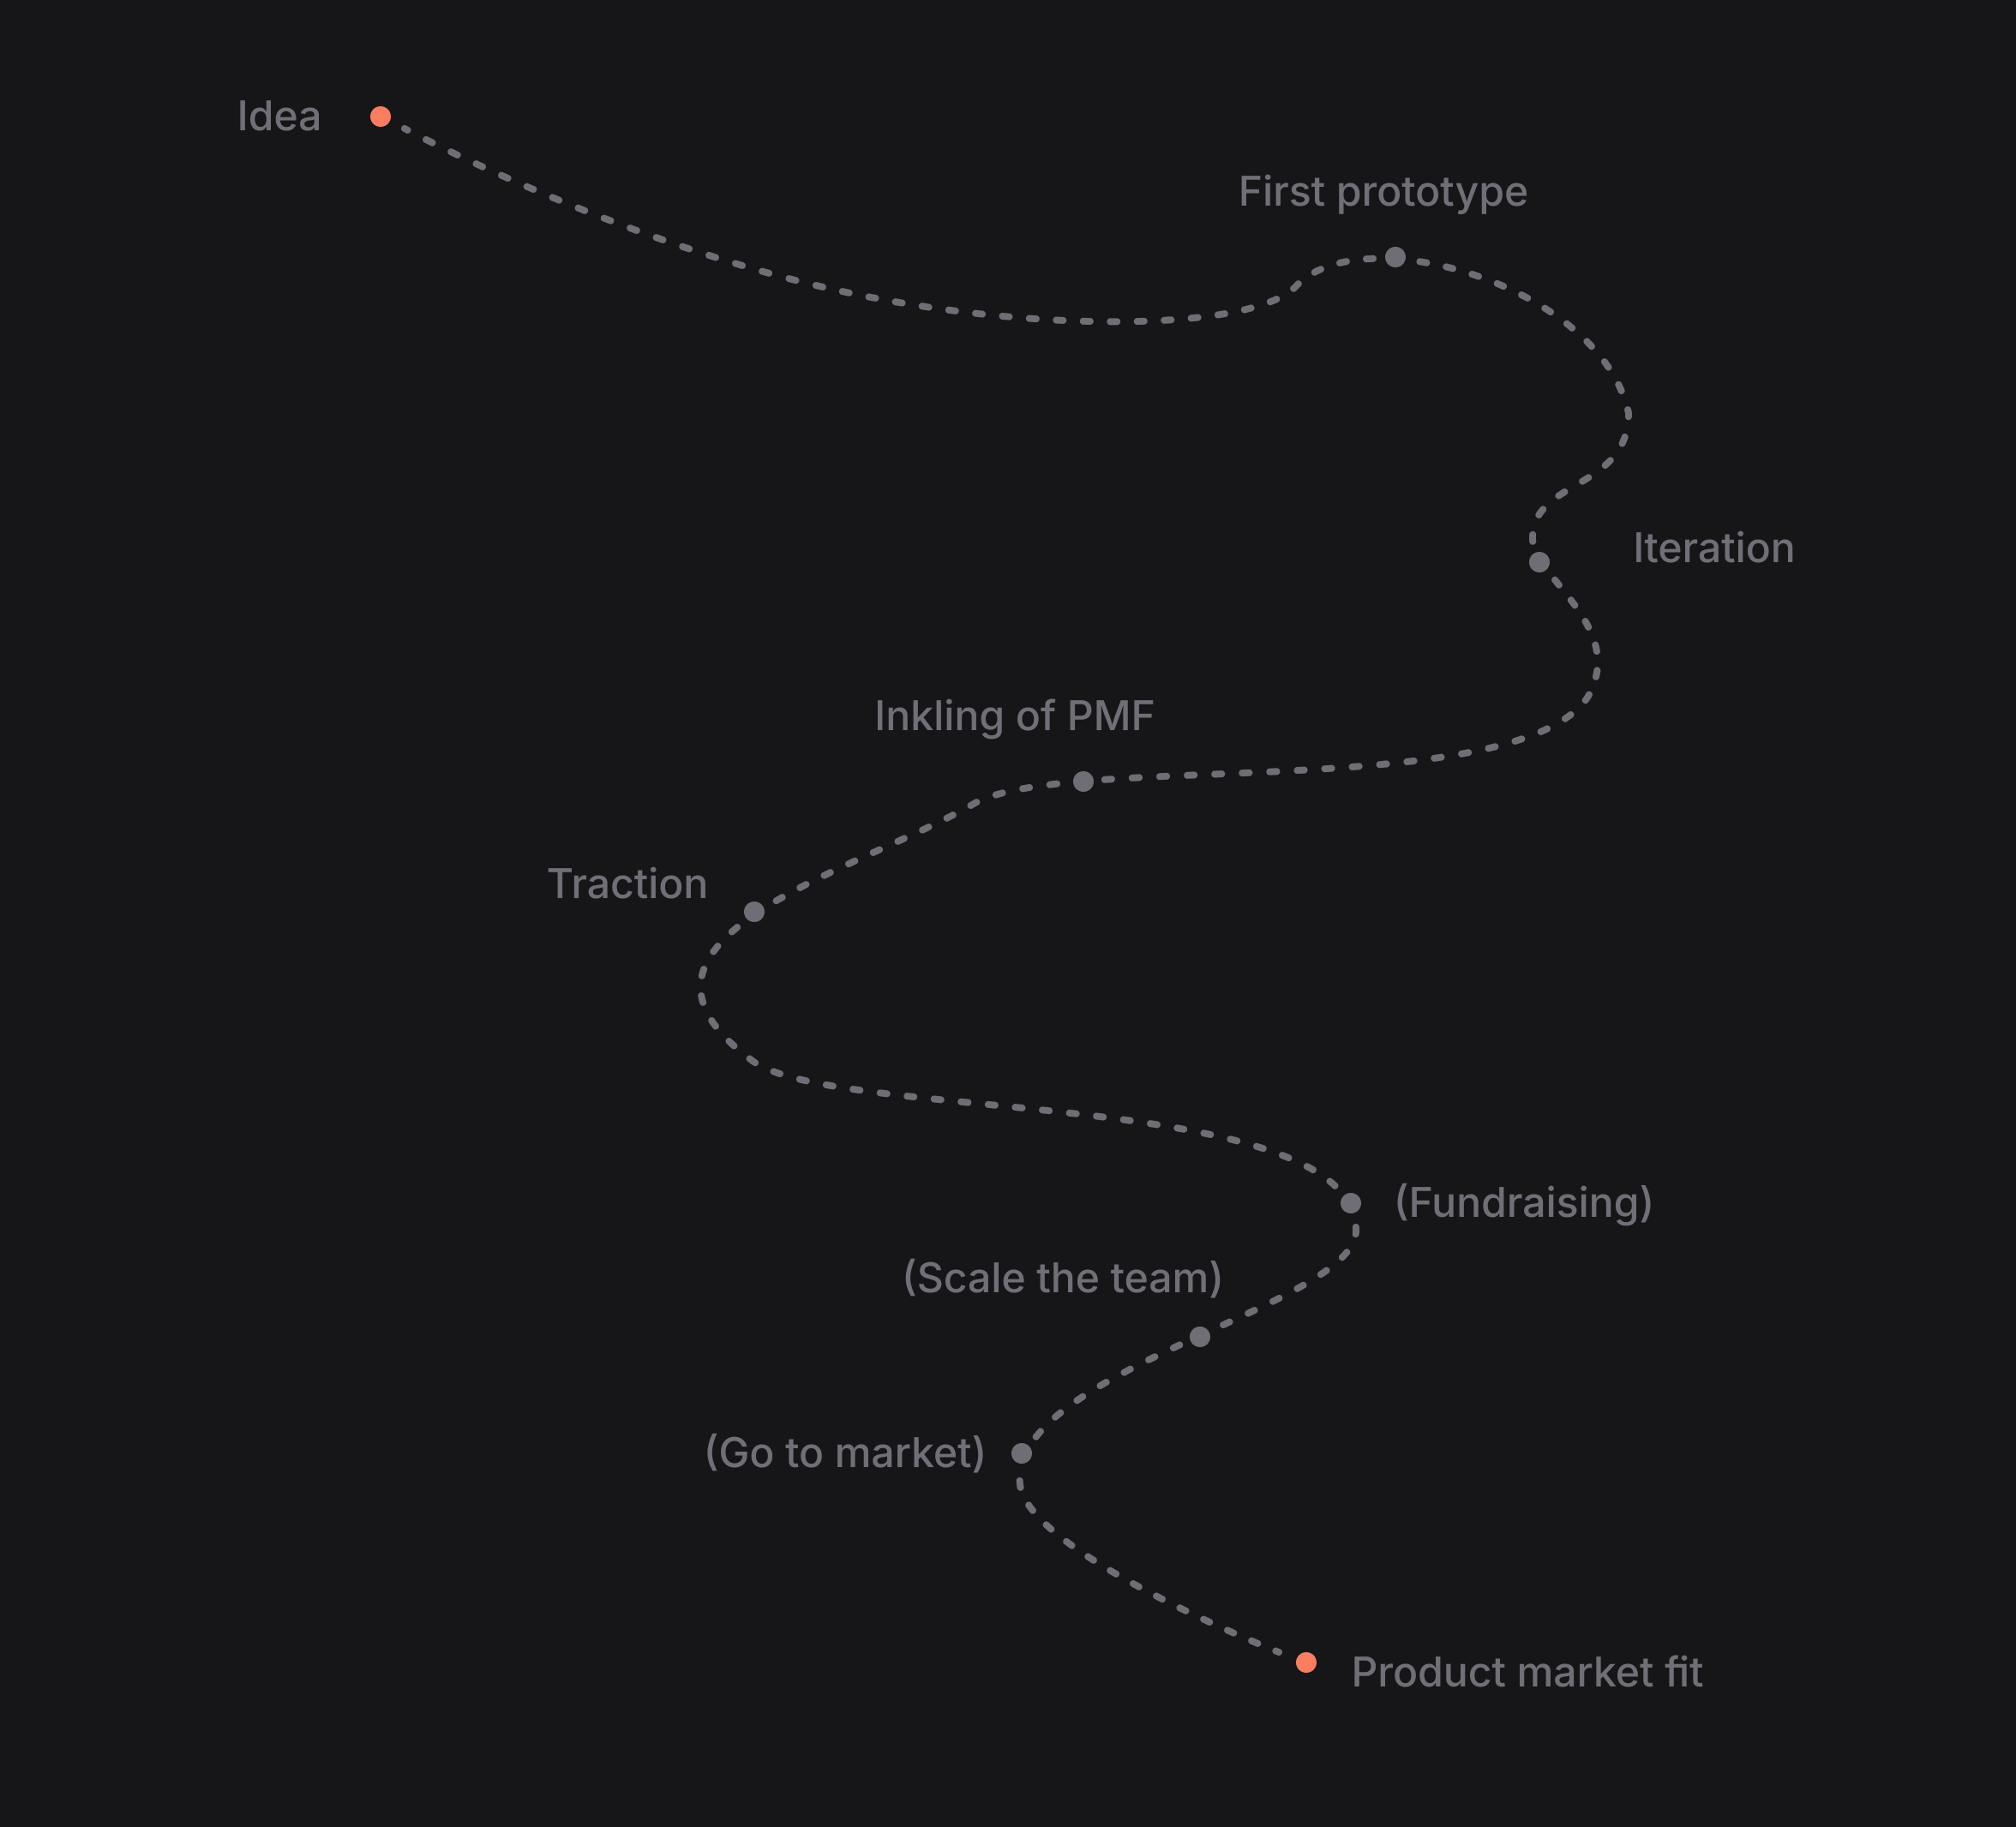 Roadmap style graphic showing the journey from idea to product market, with stops along the way. 